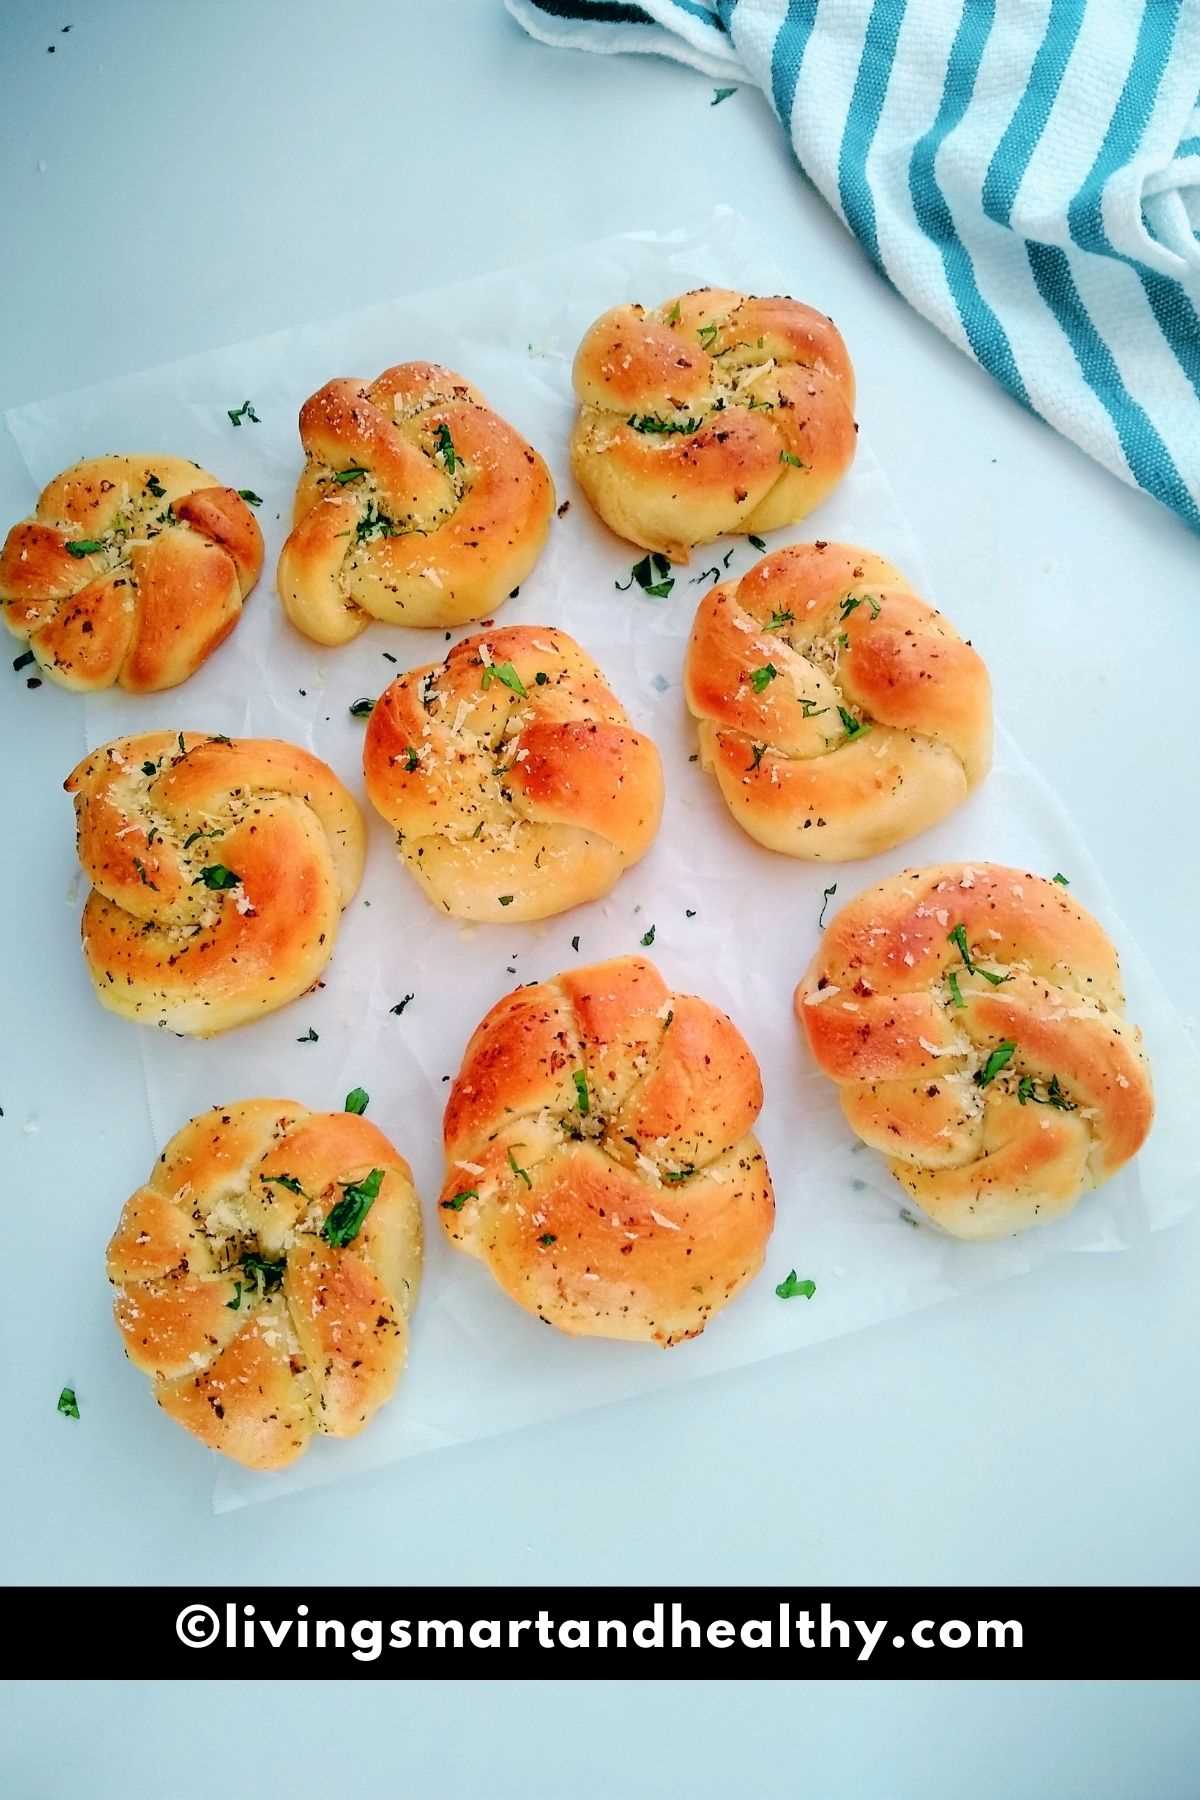 garlic knots are extra soft and fluffy